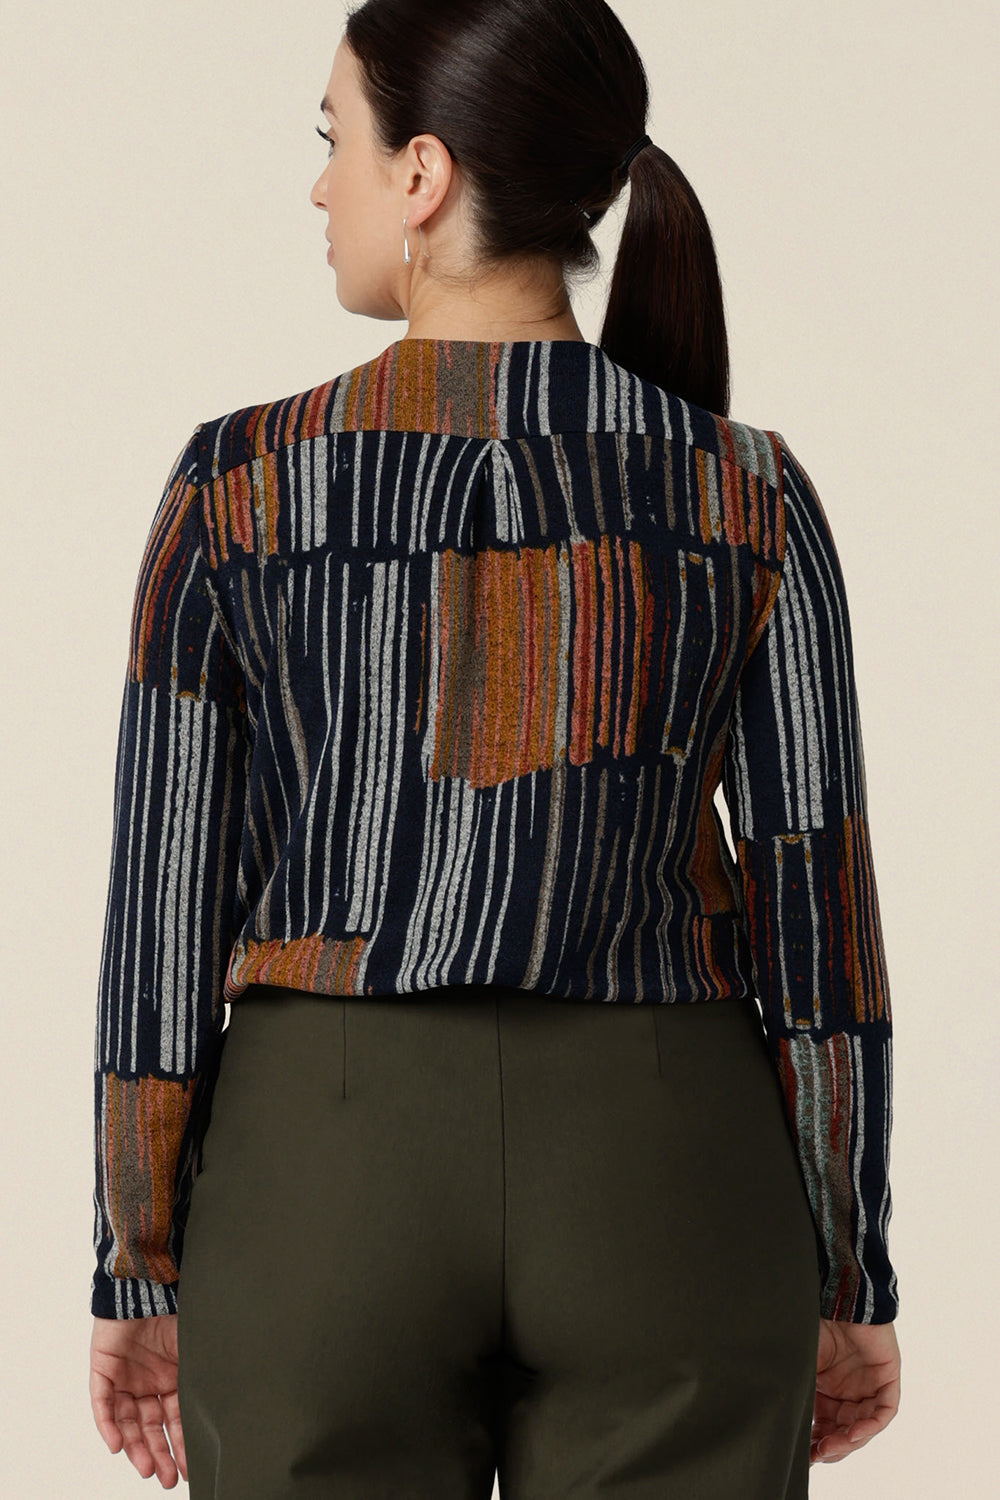 Back view of a casual top for women - this V-neck top has long sleeves and shirttail hem. In a fine knit jersey fabric, this non-iron top is made in Australia by women's clothes brand, Leina & Fleur. Shop tops online in sizes 8 to 24.